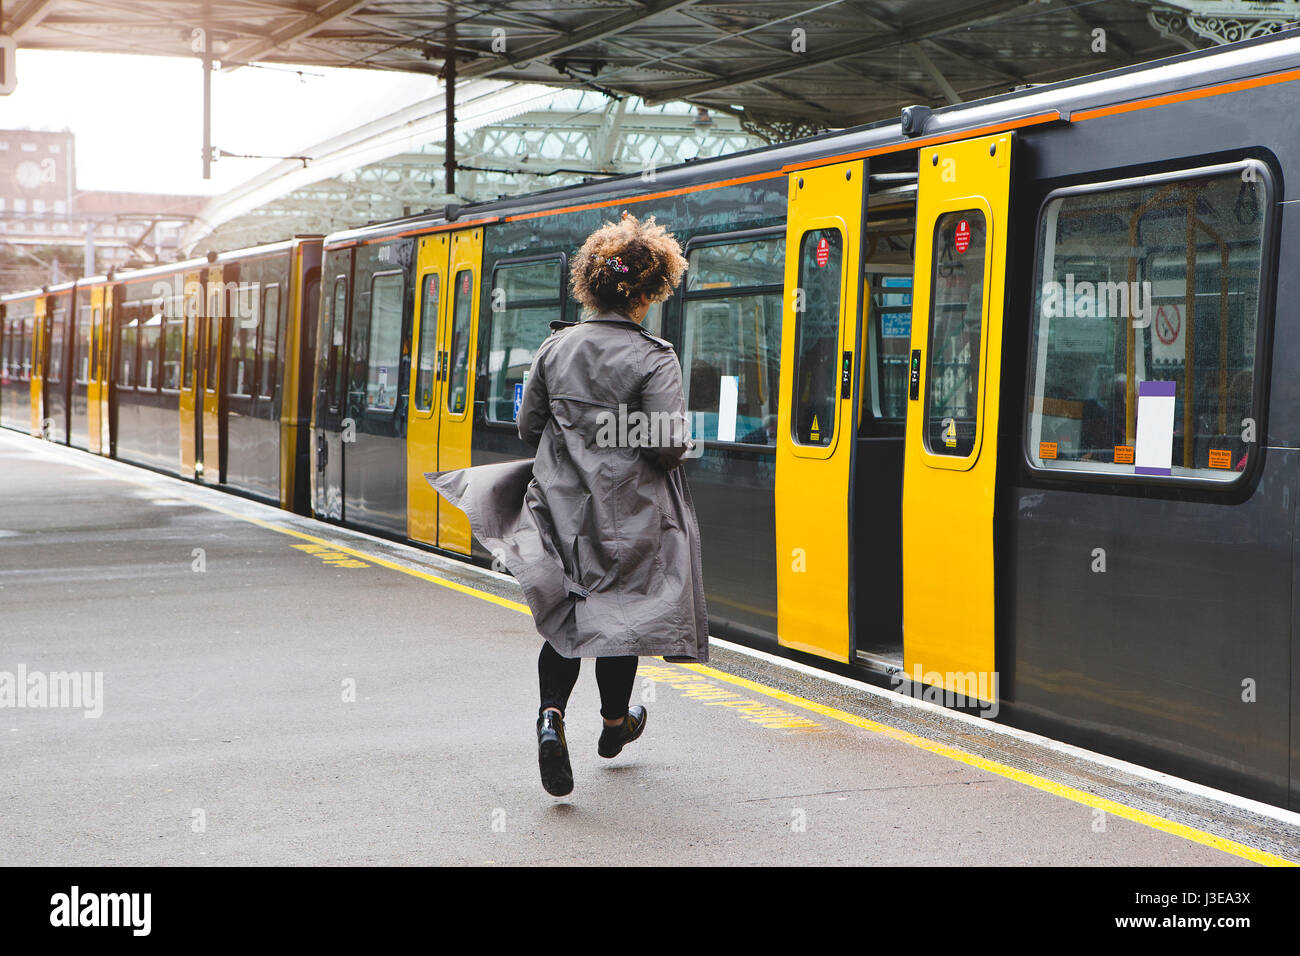 Rear view of a woman running to catch the train before it leaves the station without her. Stock Photo